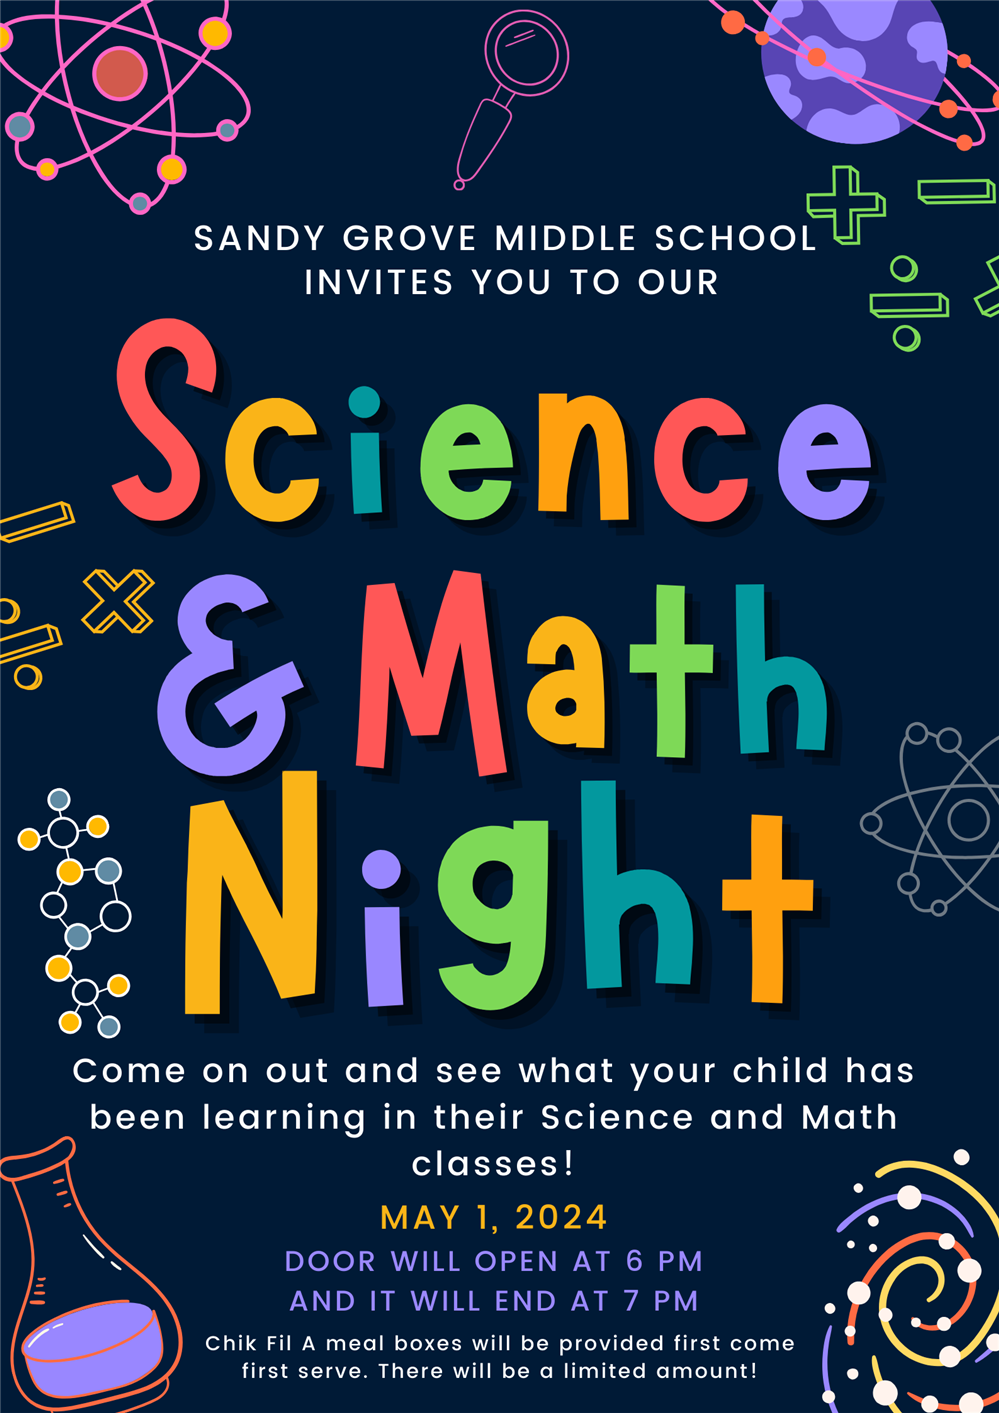  Come on out and see what our students have been learning in Science and Math this school year. Veng